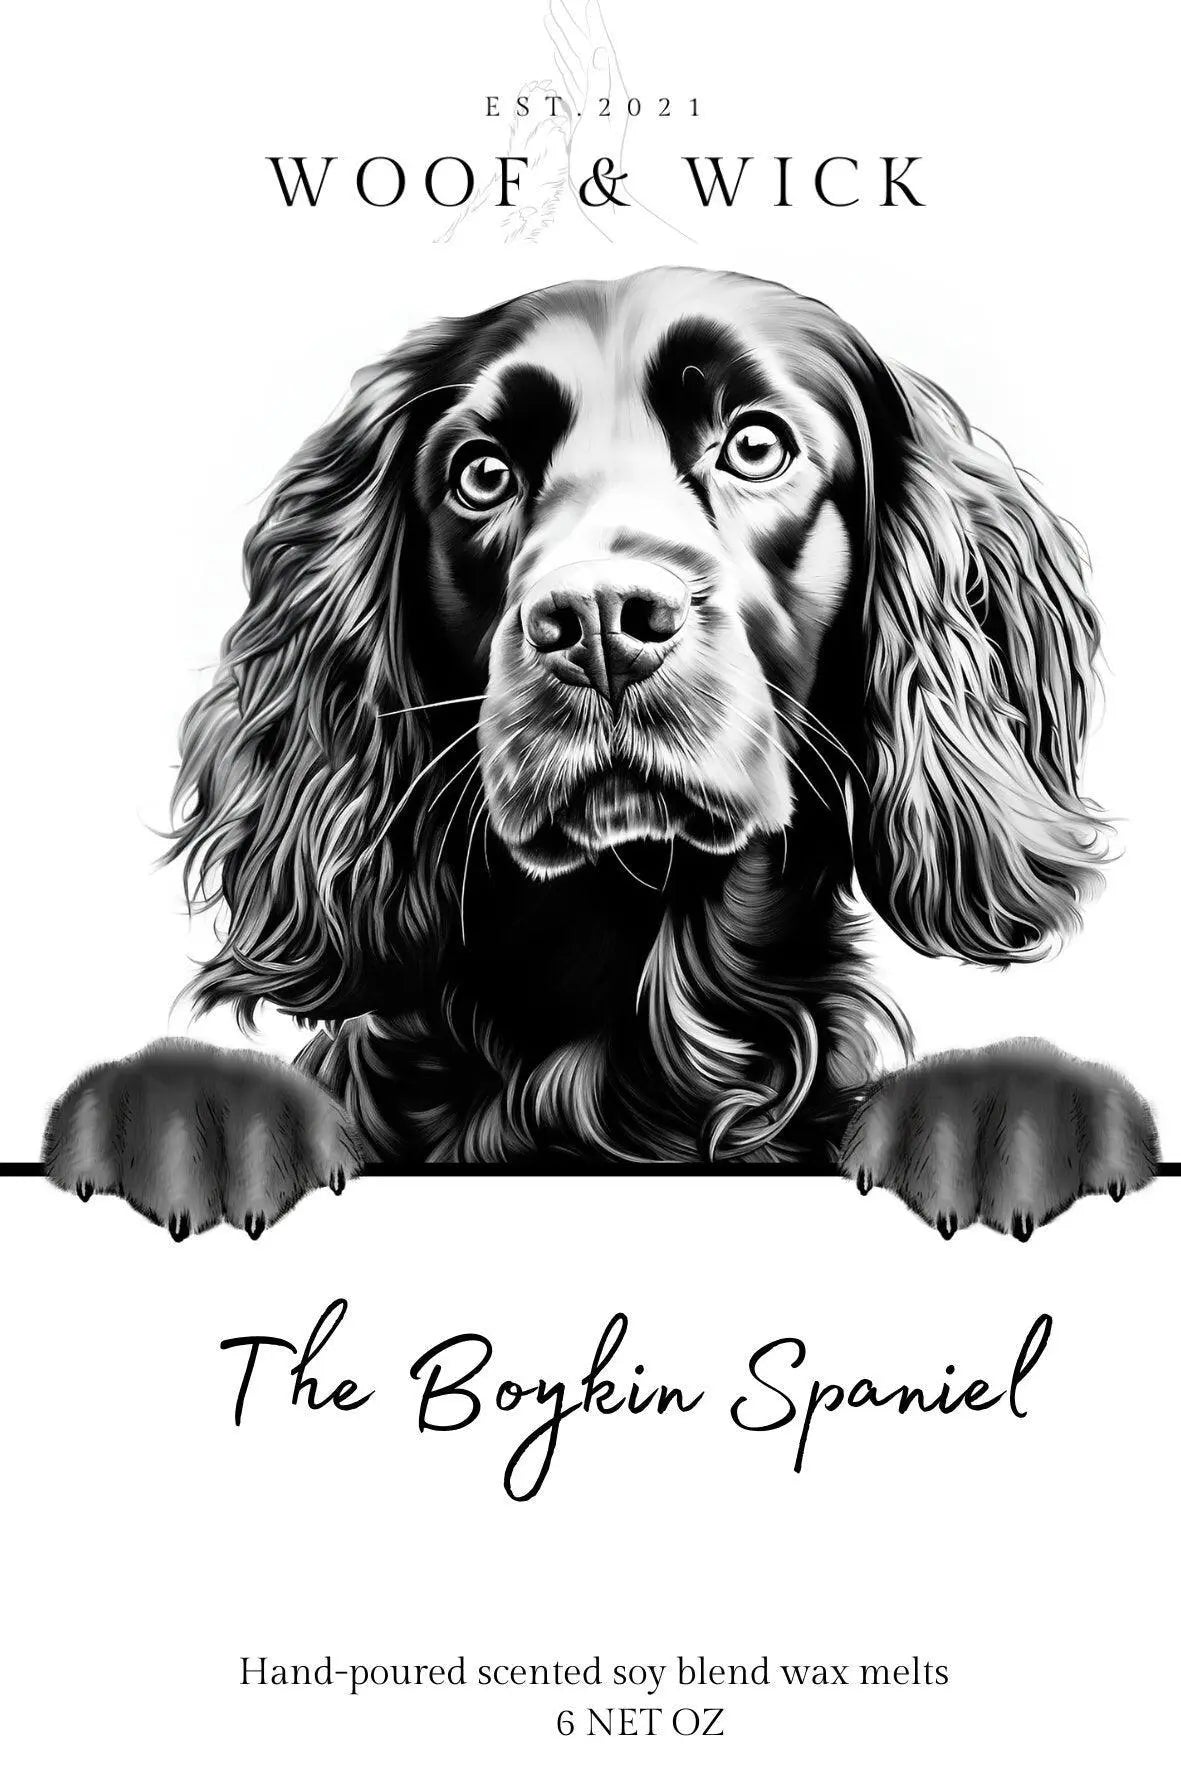 The Boykin Spaniel - STRONG SCENTED Personalized Dog Breed Soy Wax Melts | Gift Ideas | Spring Scents | Wax Tarts | spring wax melts | - Woof & Wick Candle Co.